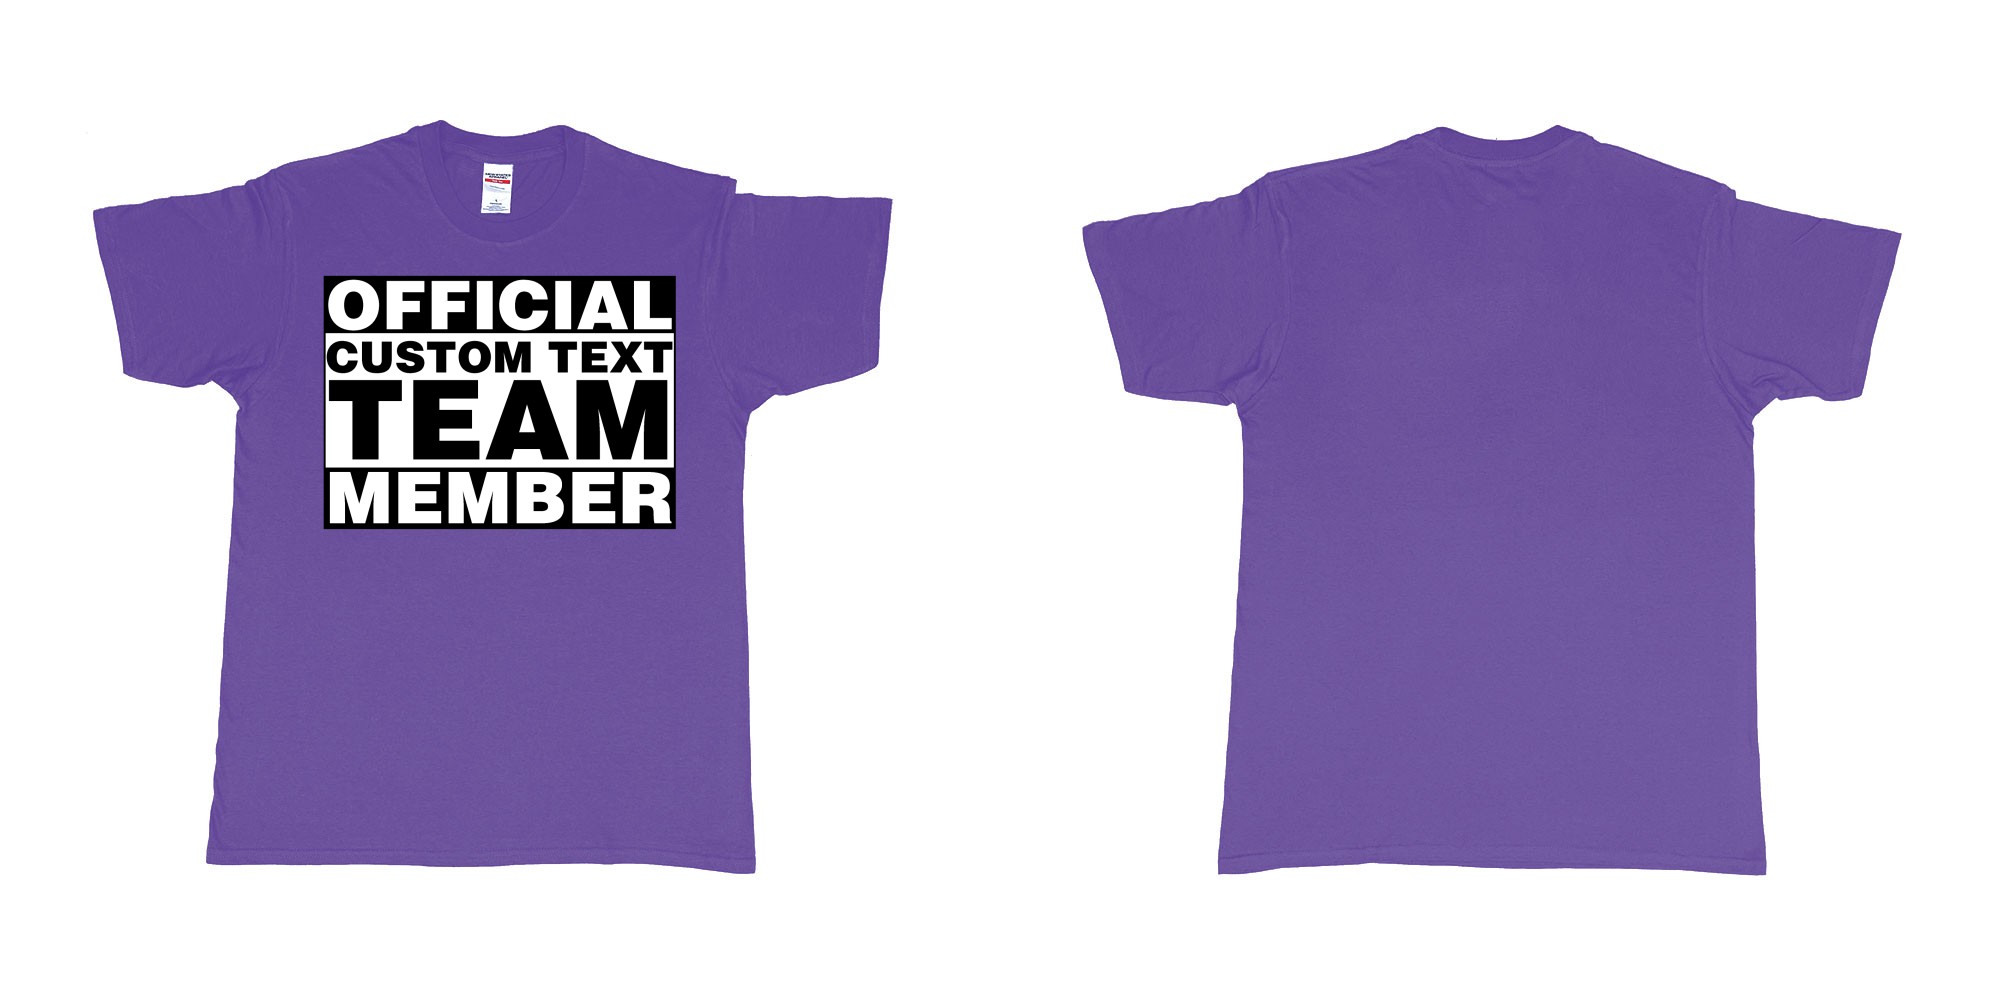 Custom tshirt design official custom text team member in fabric color purple choice your own text made in Bali by The Pirate Way